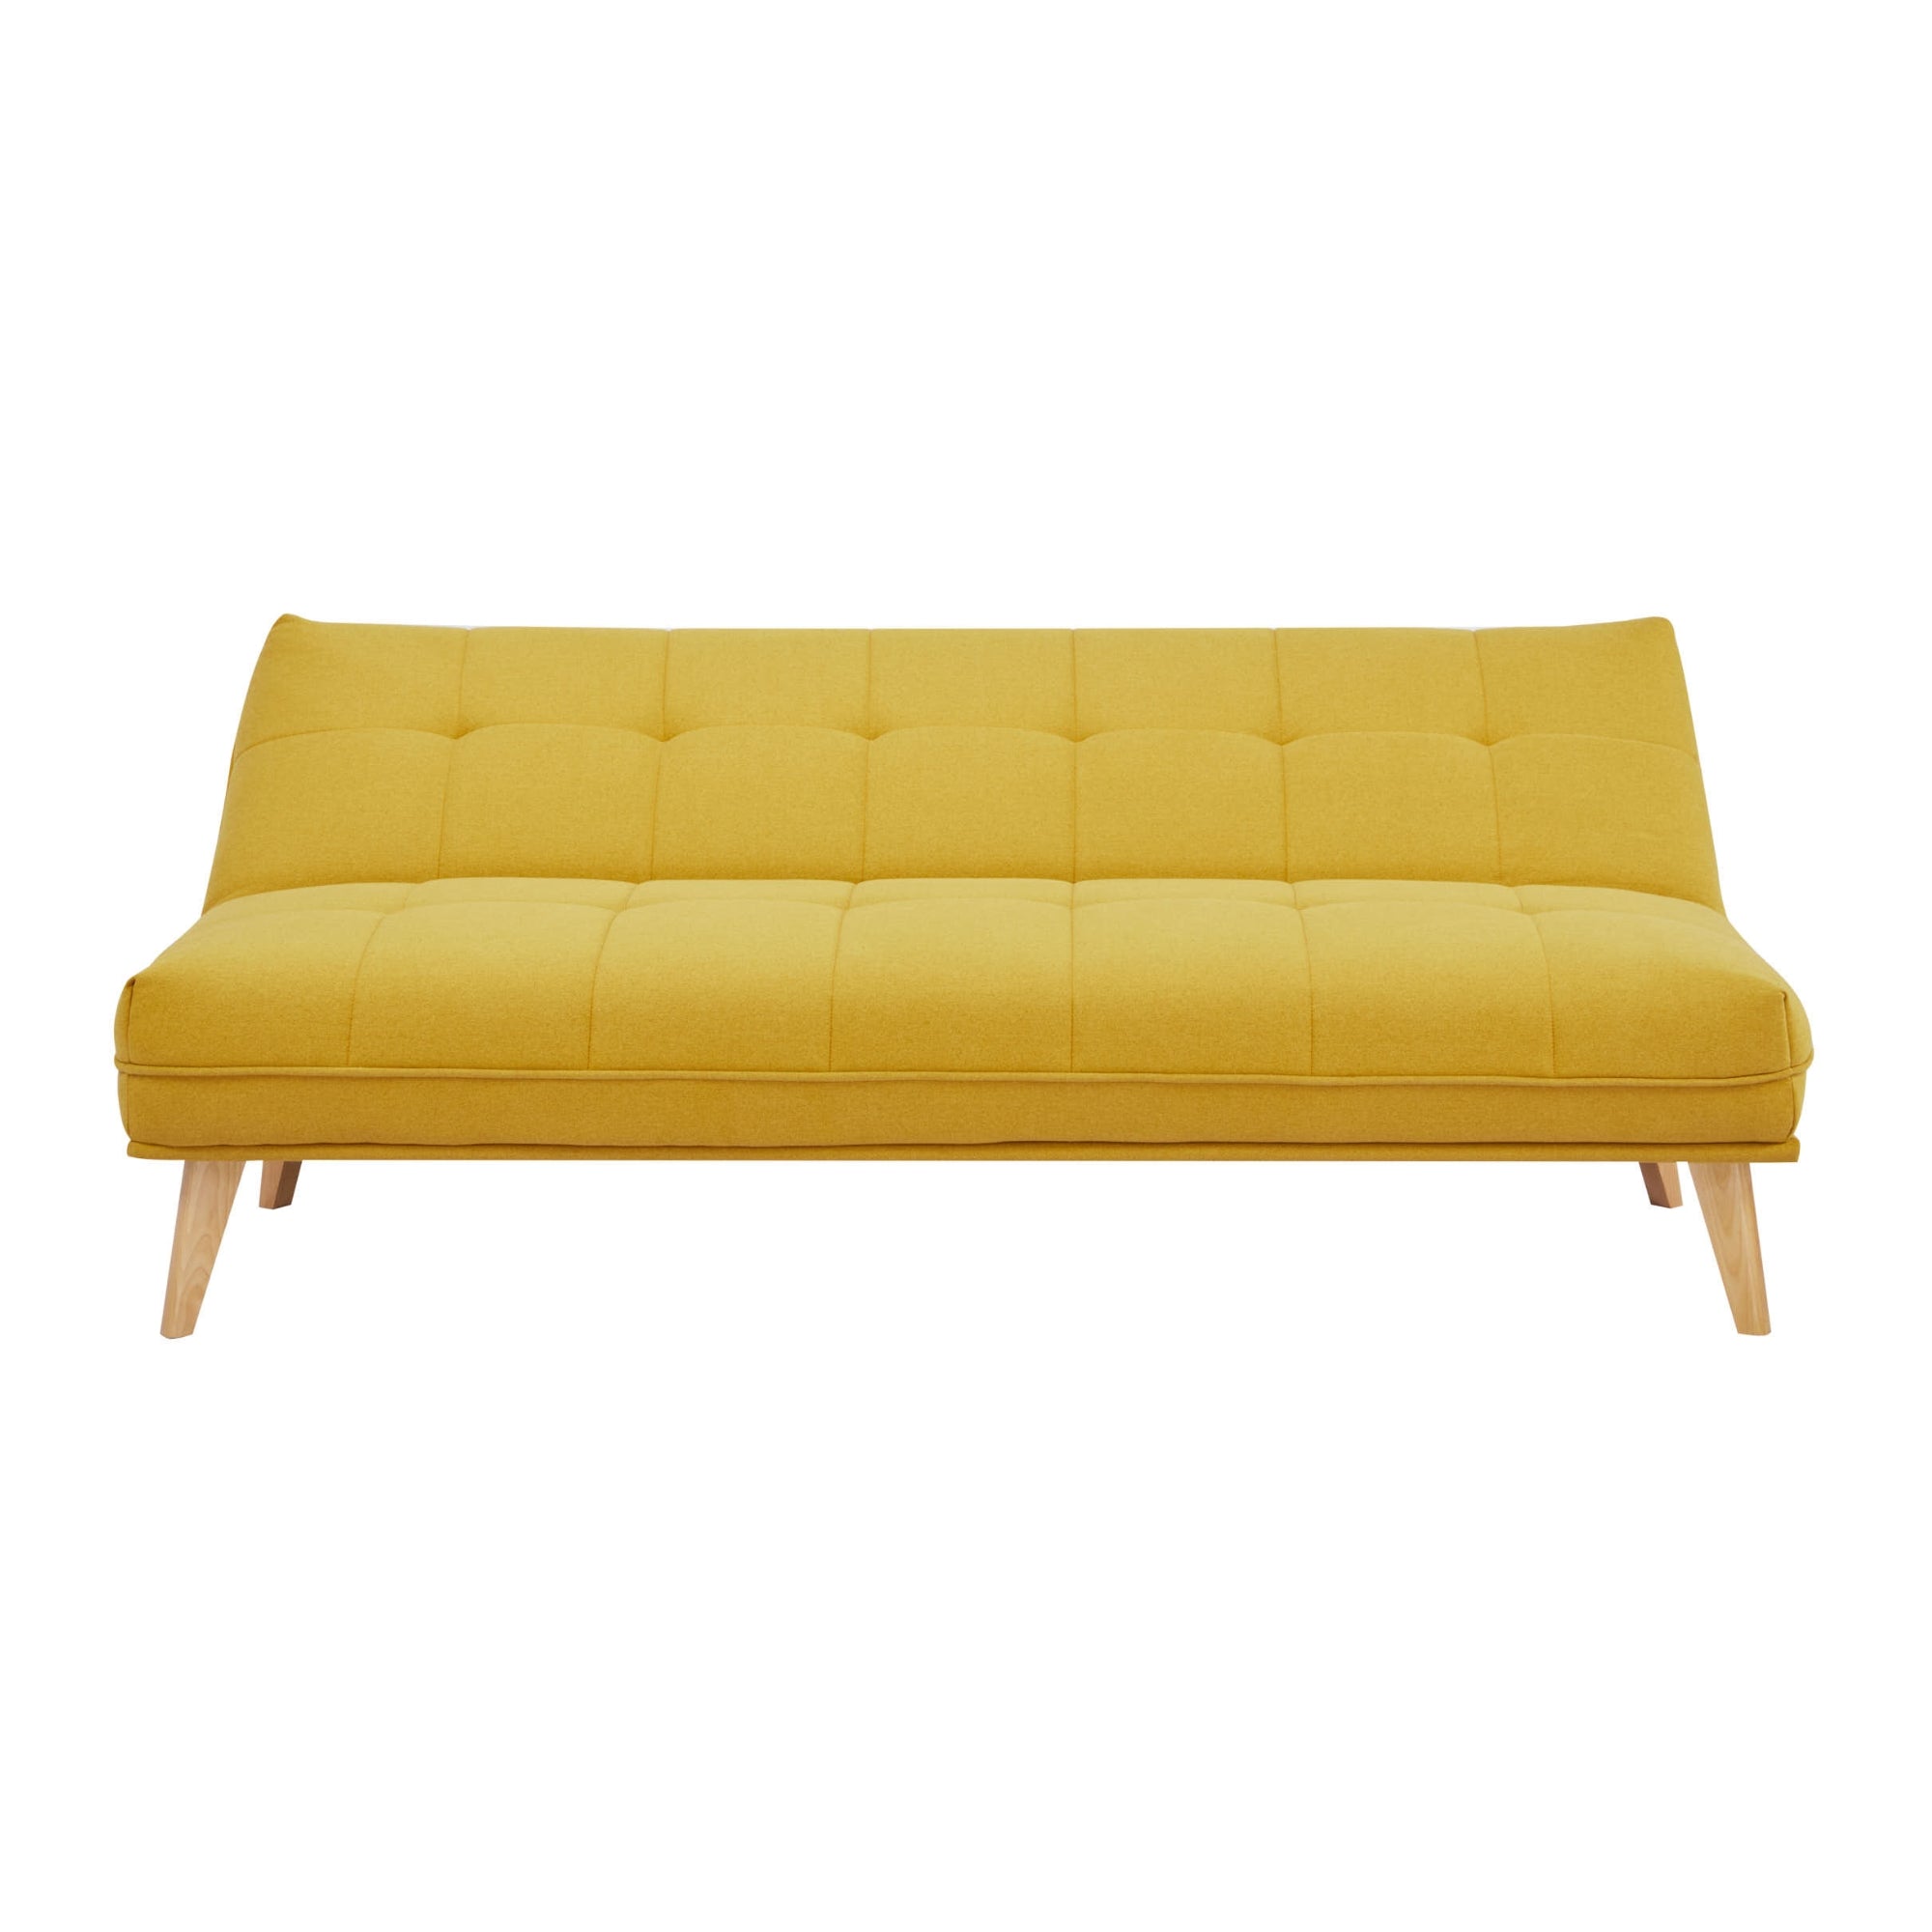 Yellow 3-Seater Sofa Bed, Upholstered, Wooden Legs | Jovie